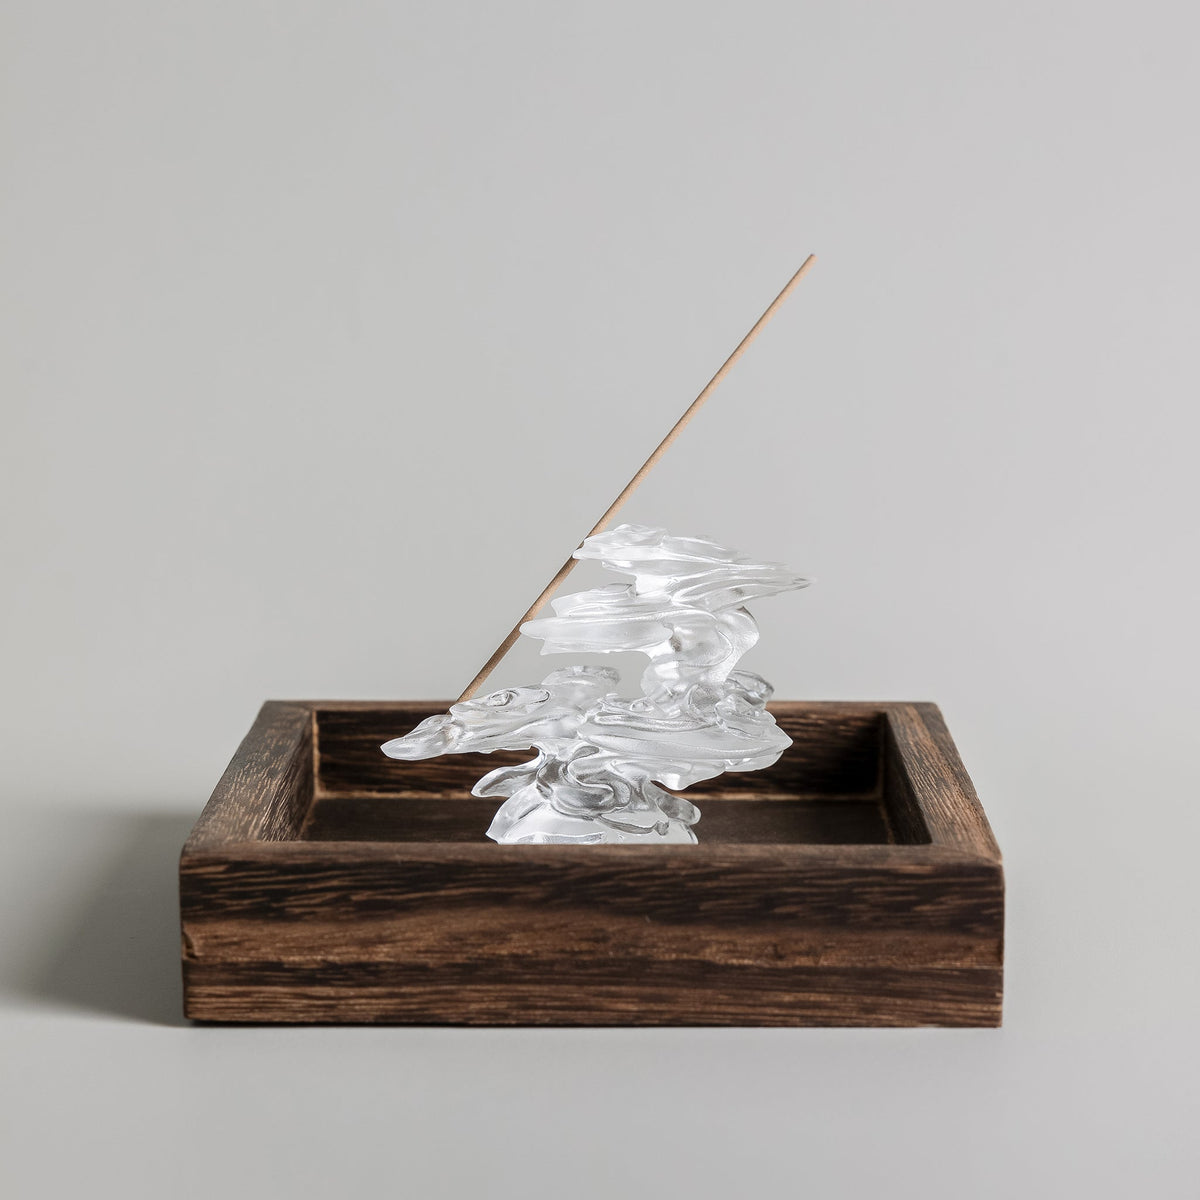 A cloud-shaped liuli glass incense burner in a wooden tray